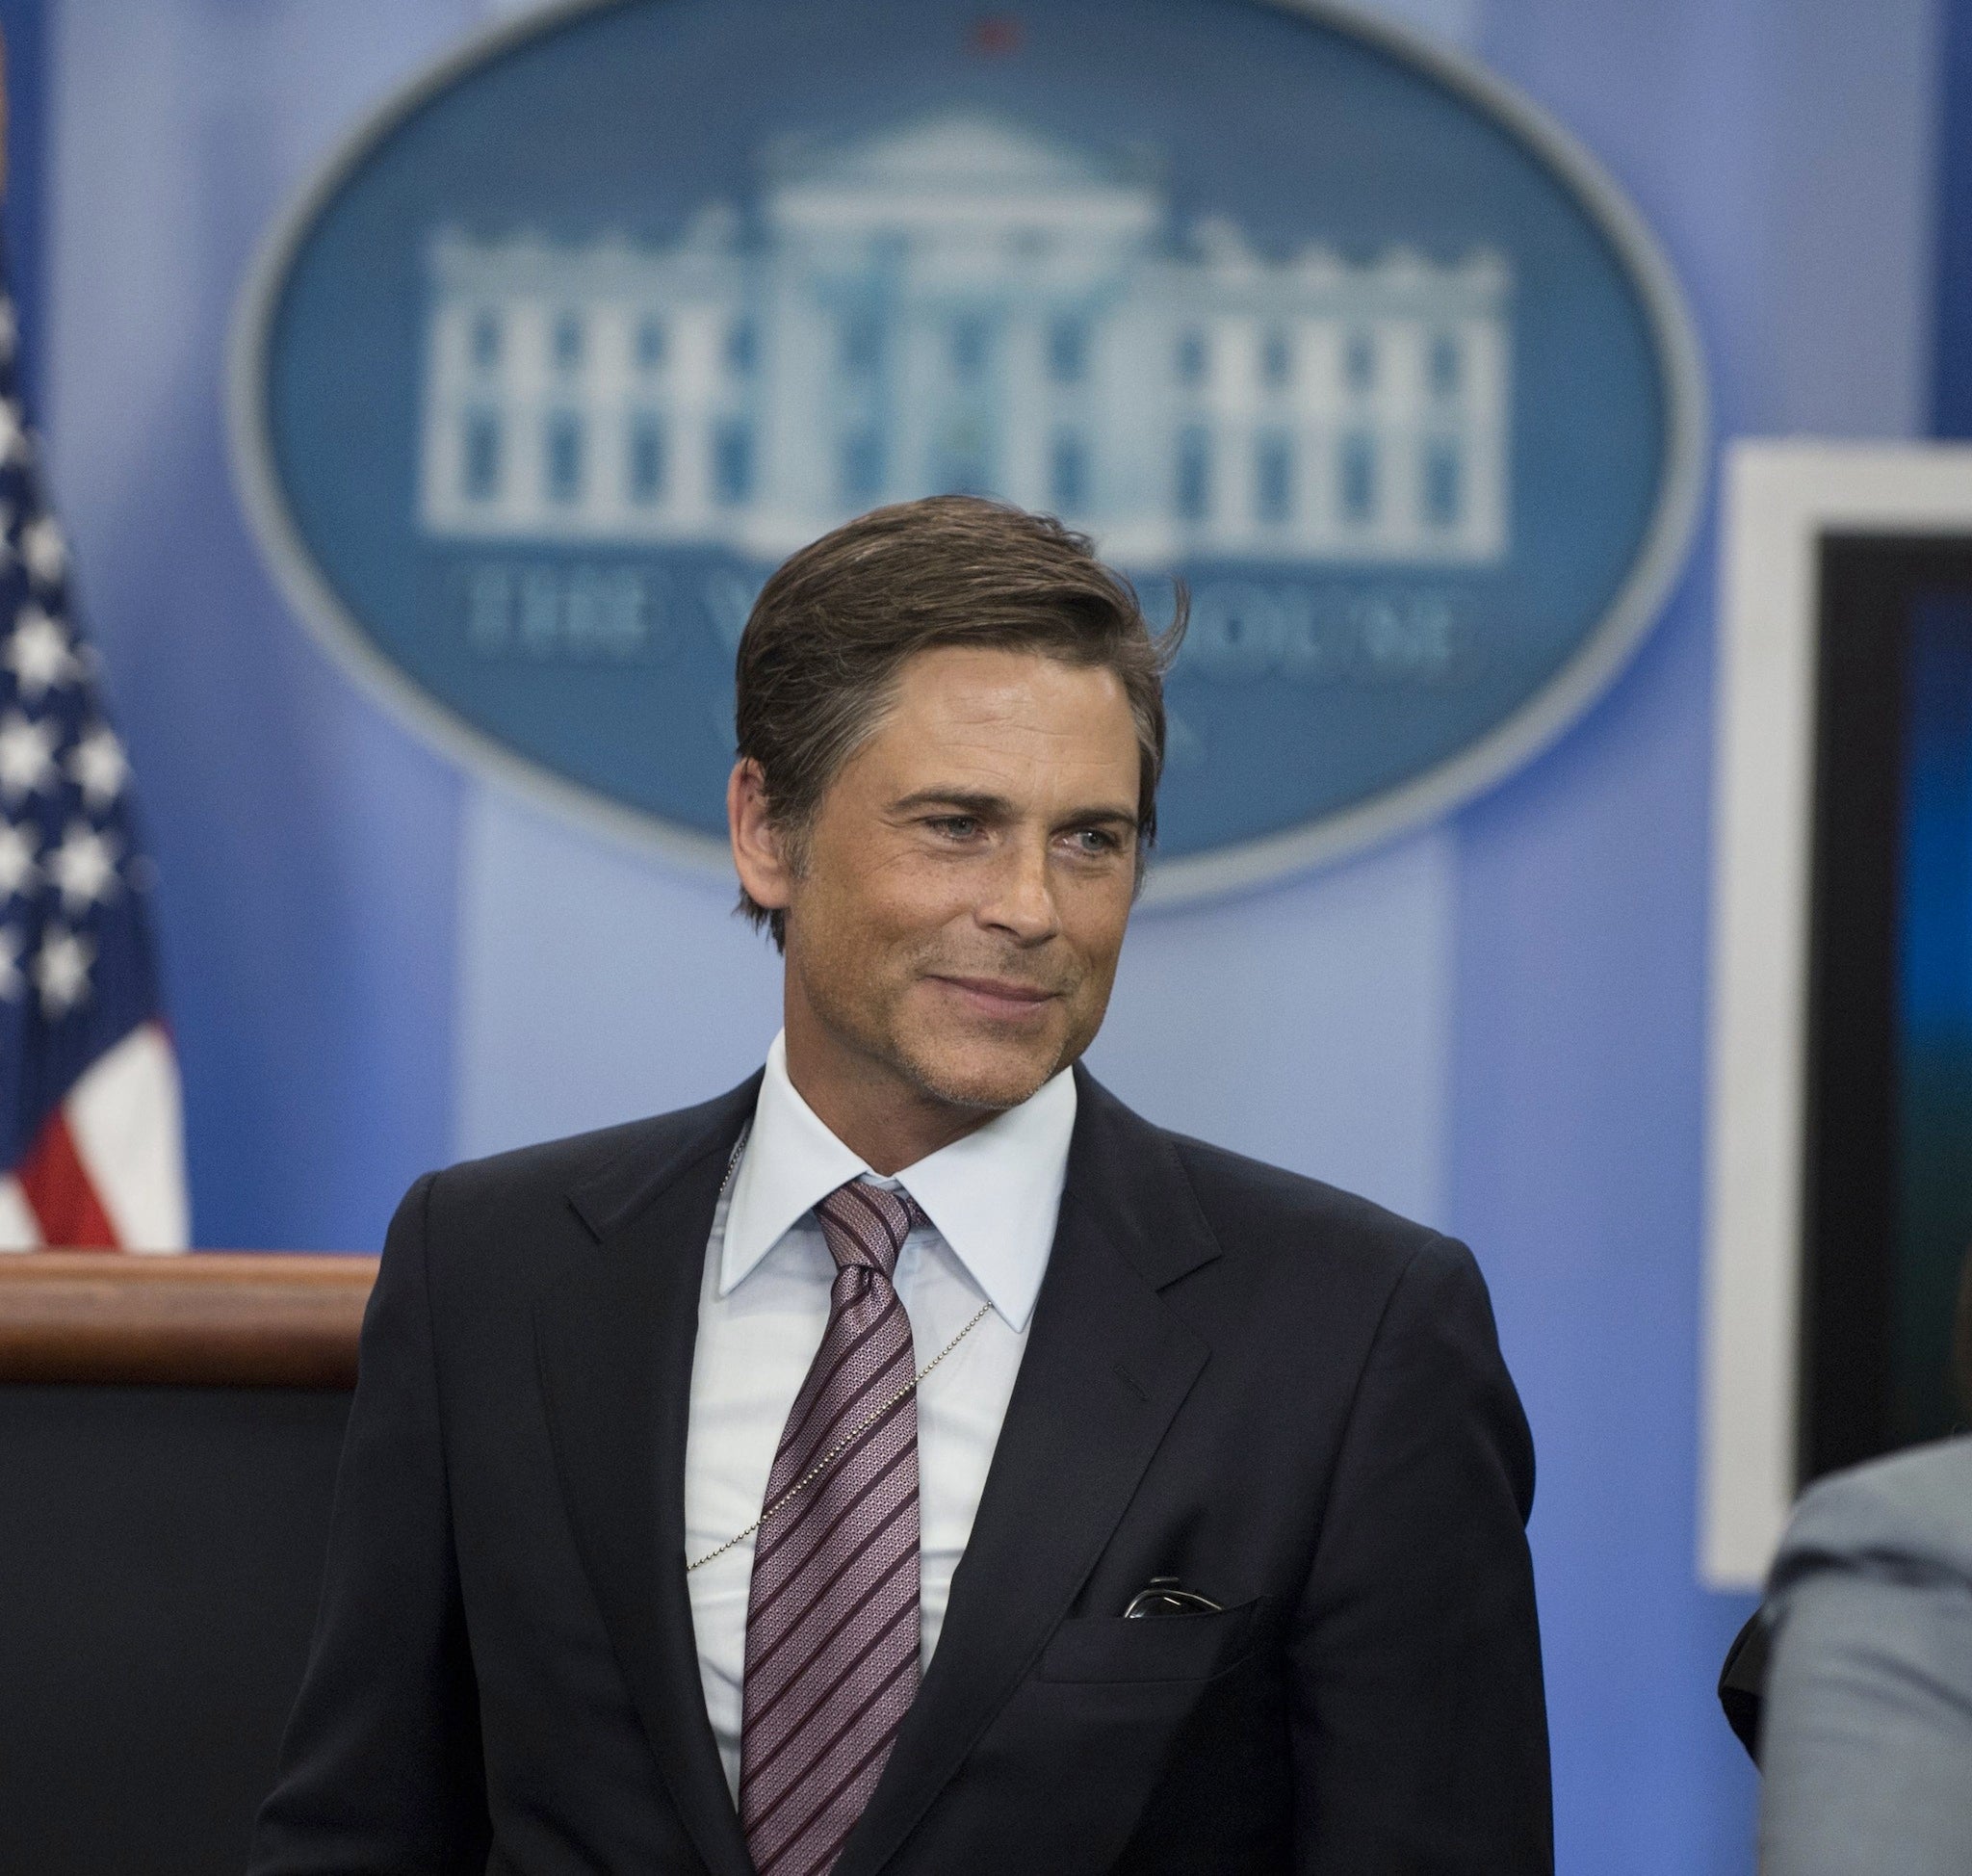 Actor Rob Lowe visits the White House earlier this year